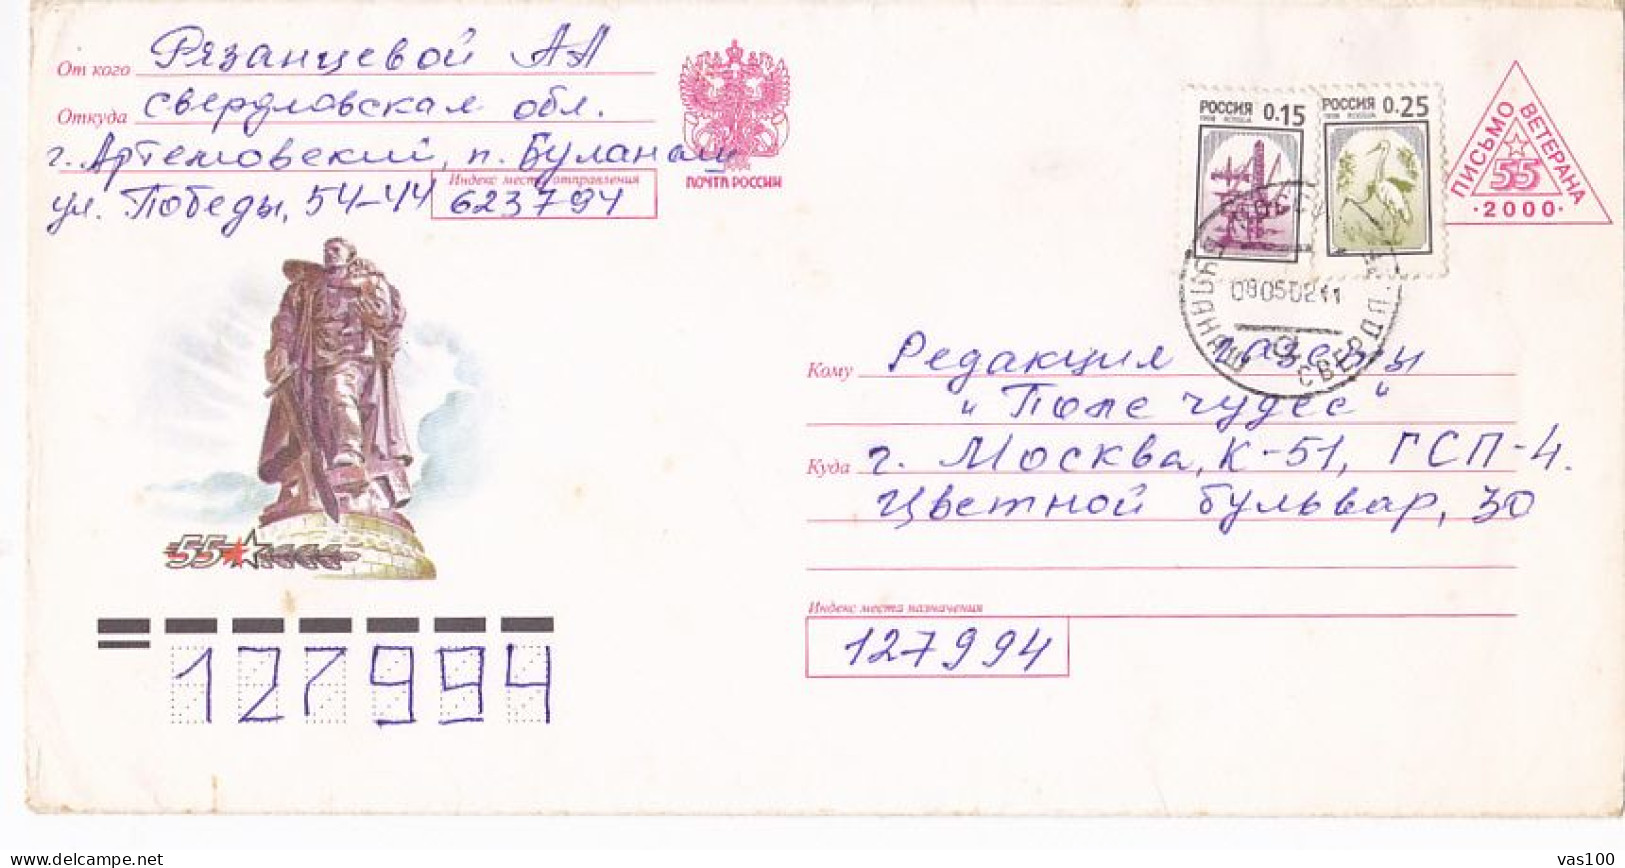 END OF WW2 ANNIVERSARY, MONUMENT, COVER STATIONERY, ENTIER POSTAL, 2000, RUSSIA - Stamped Stationery